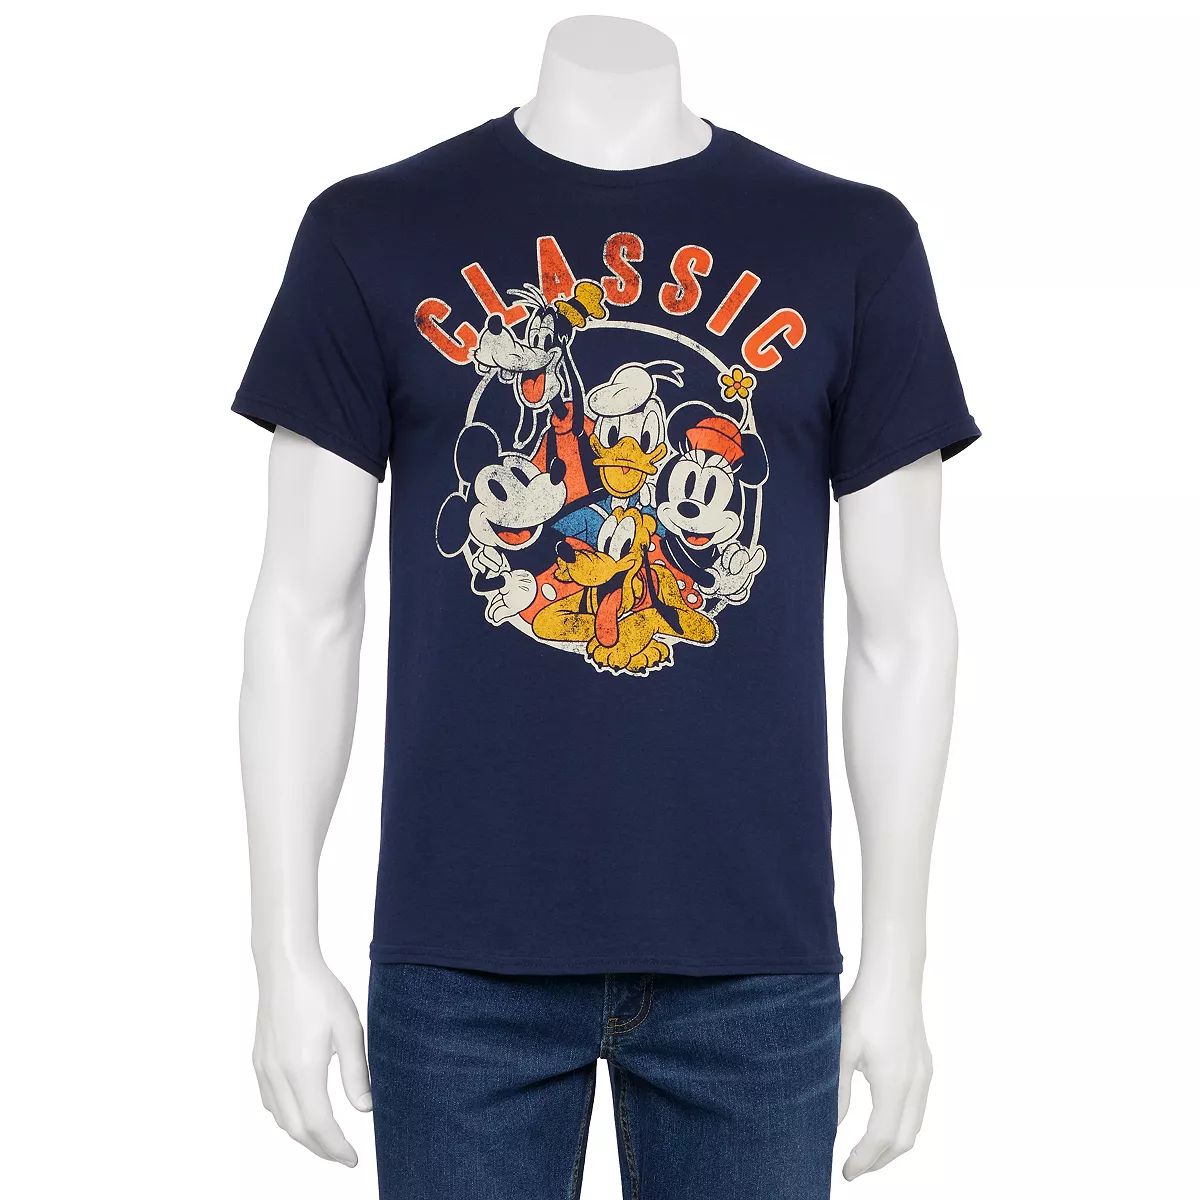 Disney's Mickey Mouse & Friends Men's Vintage Graphic Tee | Kohl's